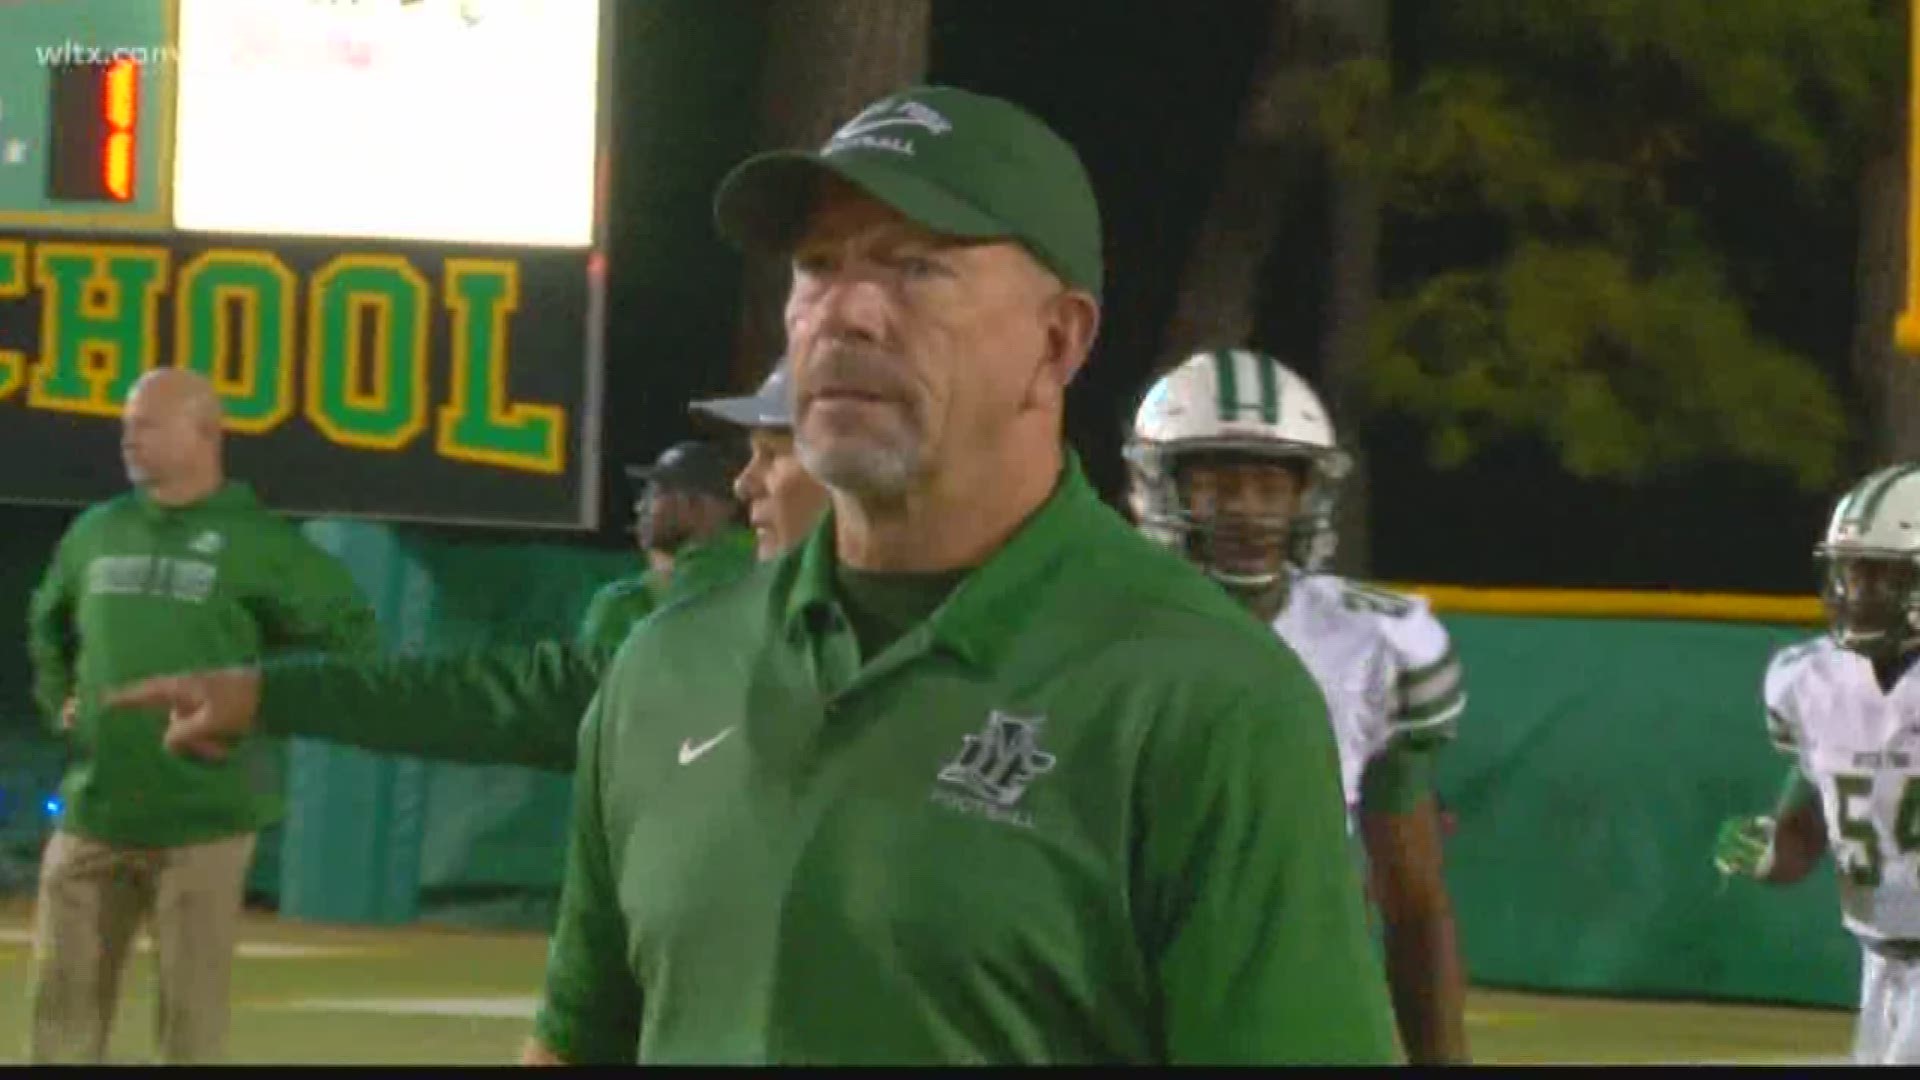 A team meeting saw head coach Tom Knotts lay into his team for its behavior in Friday's win at Summerville.